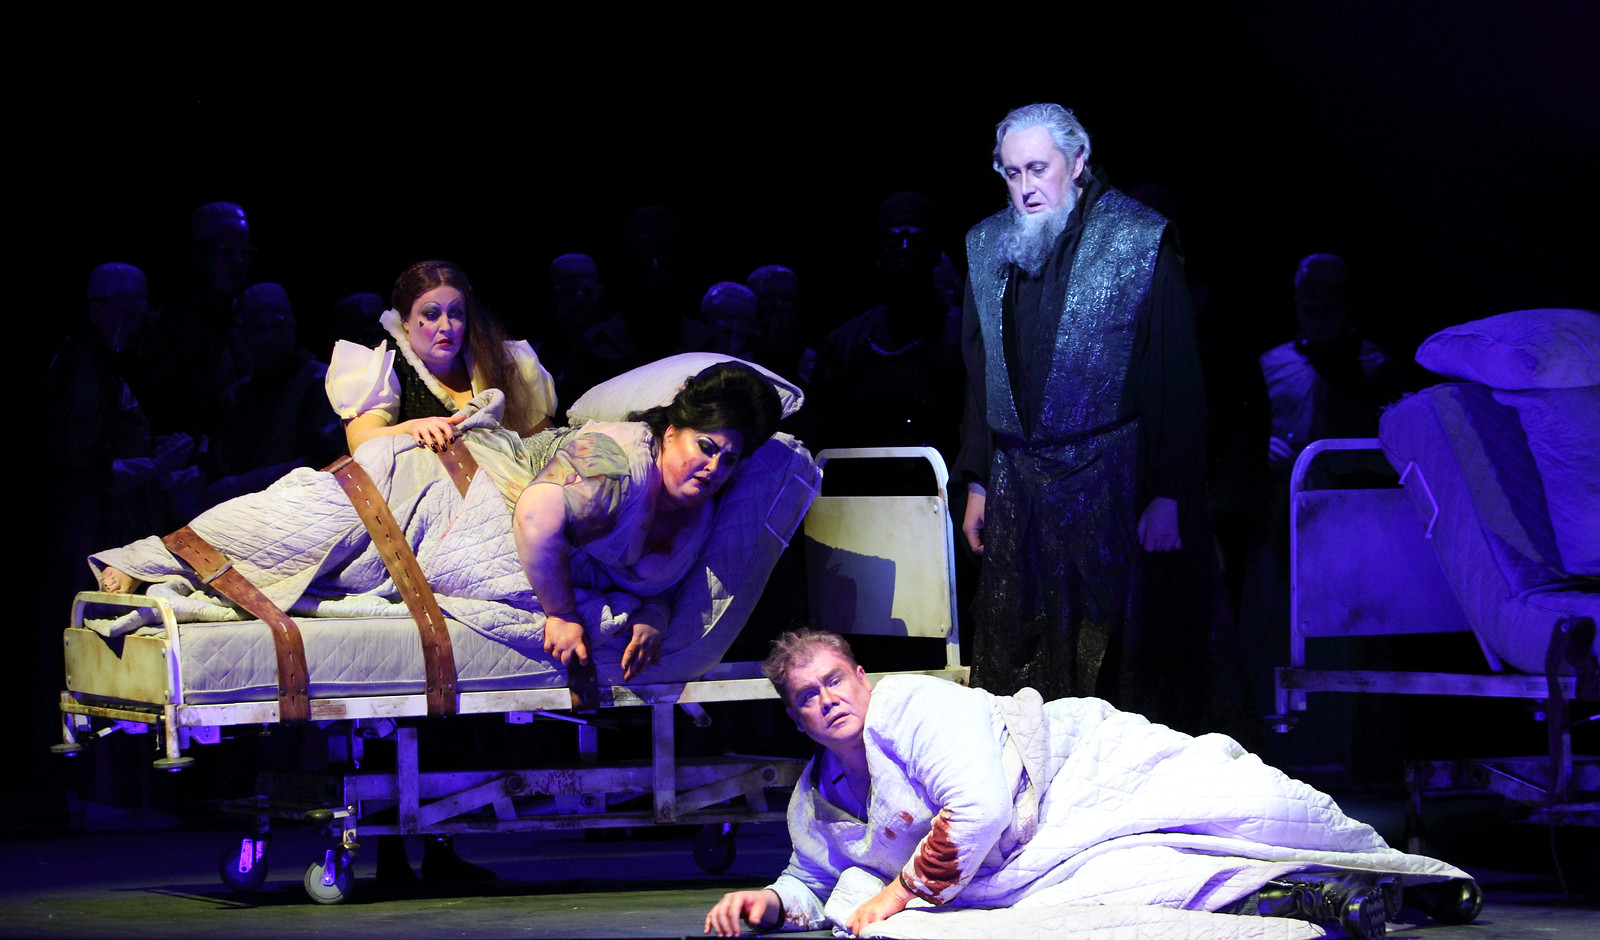 Act Two scene from ENO Tristan and Isolde